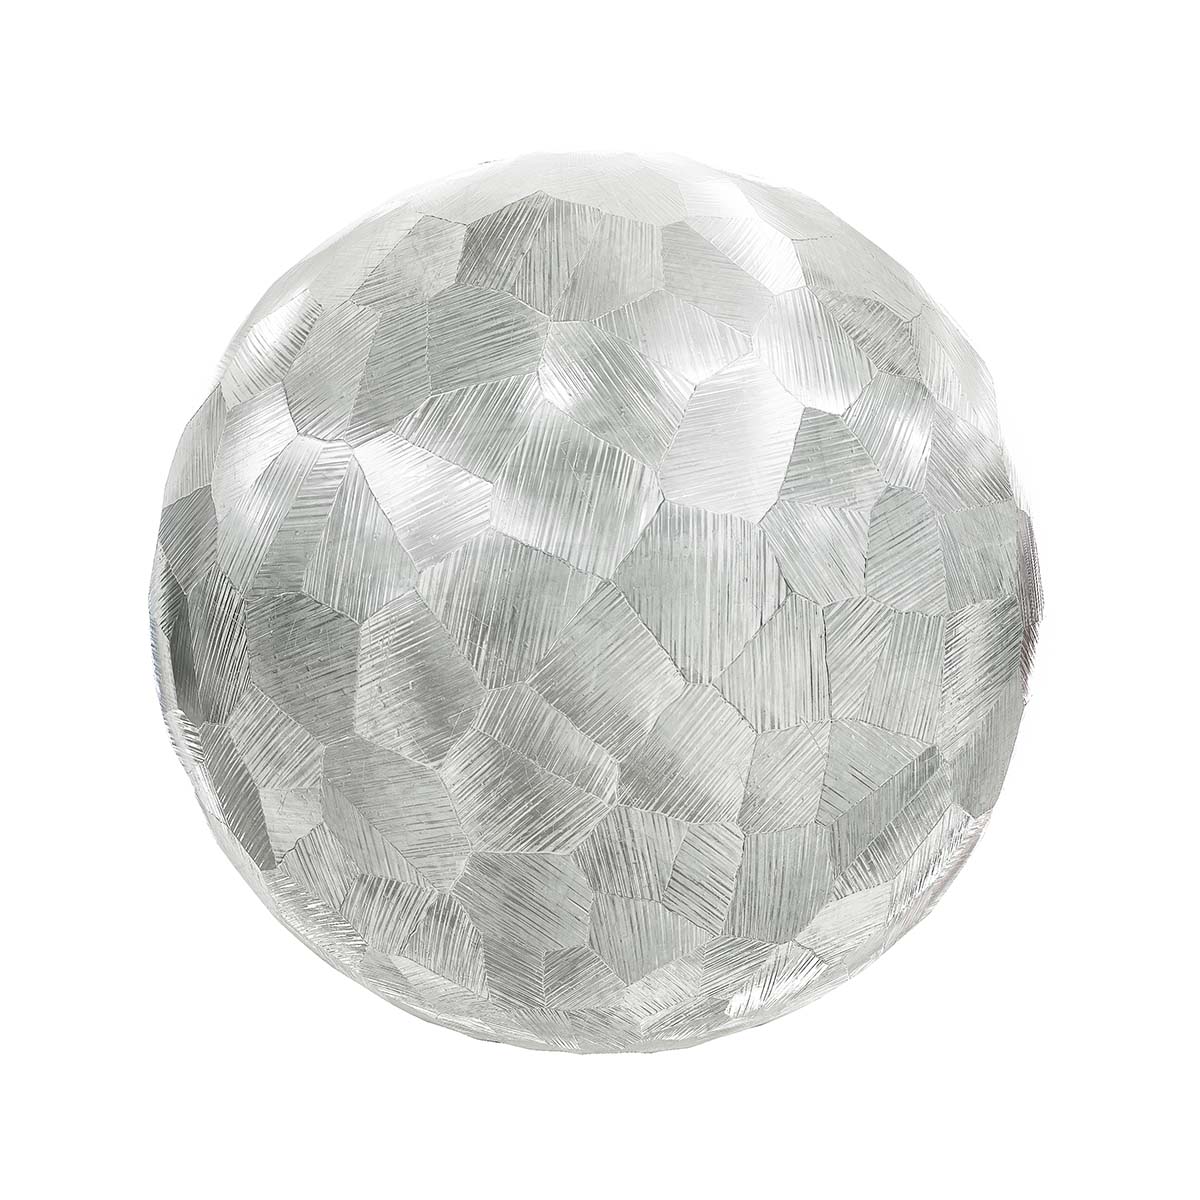 Patterned Glass PBR Texture